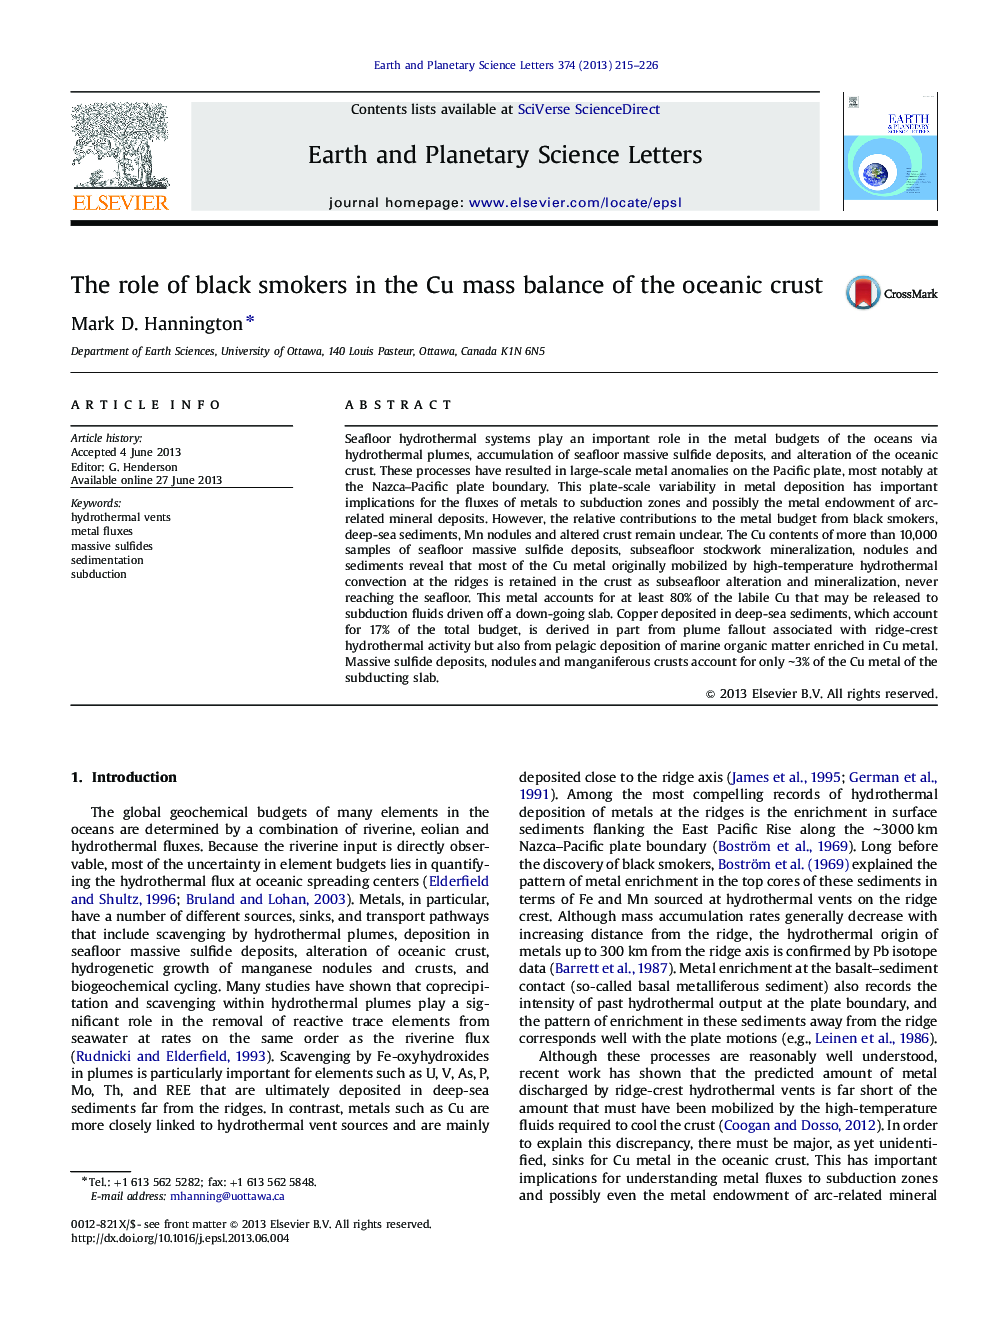 The role of black smokers in the Cu mass balance of the oceanic crust